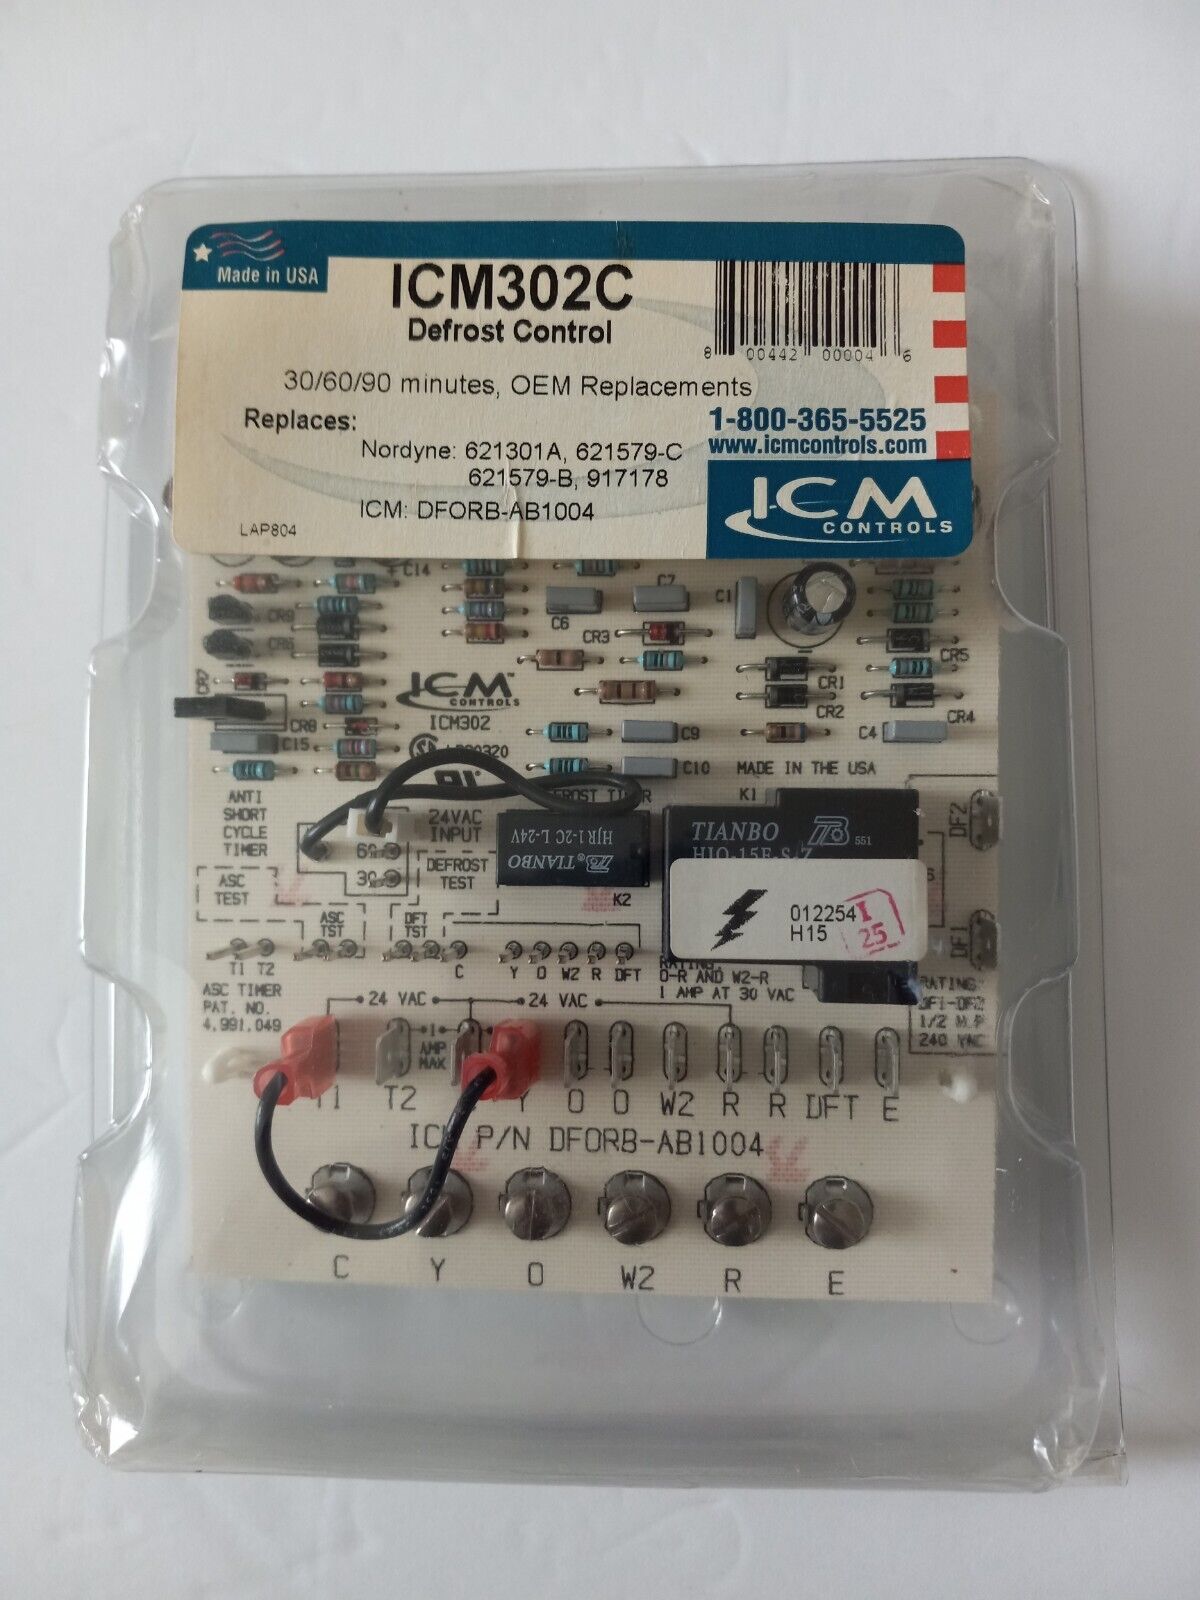 Defrost Control ICM302C  30/60/90 OEM Replacements New Open Package 